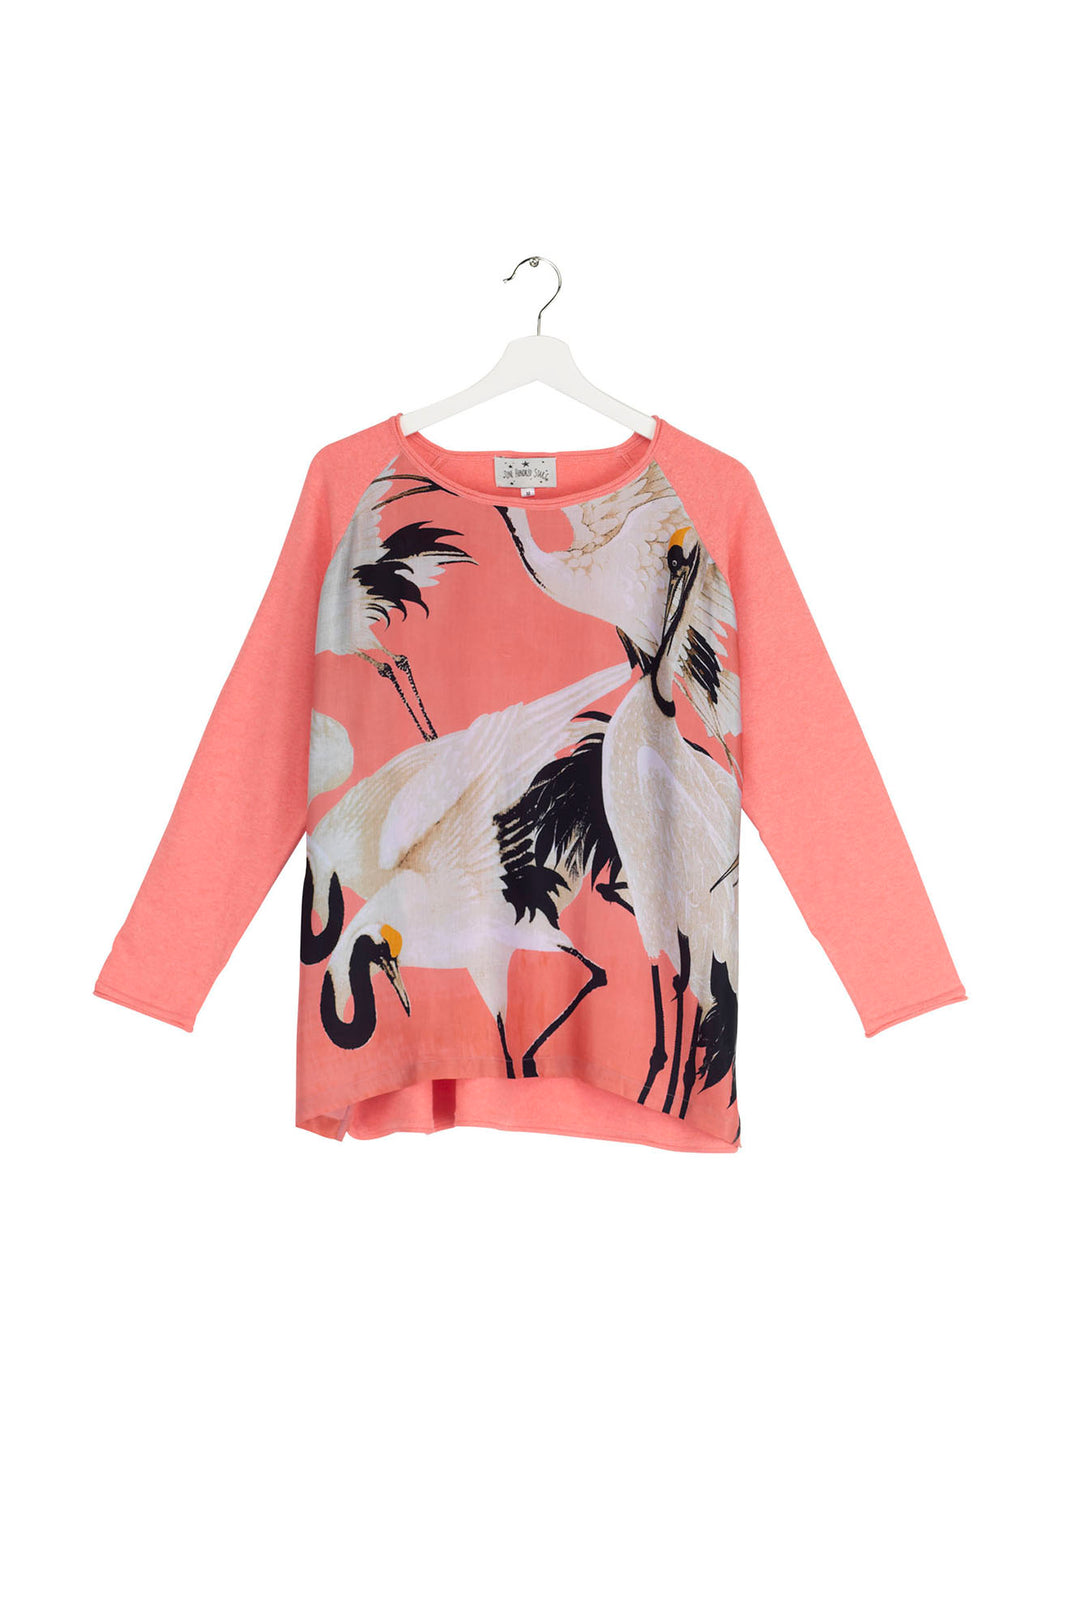 The One Hundred Stars Stork Crane Lipstick Pink cotton jerseys are perfect for the cooler months.   Here is our best selling Stork print on the front of this cool boxy Lipstick Pink jumper. 